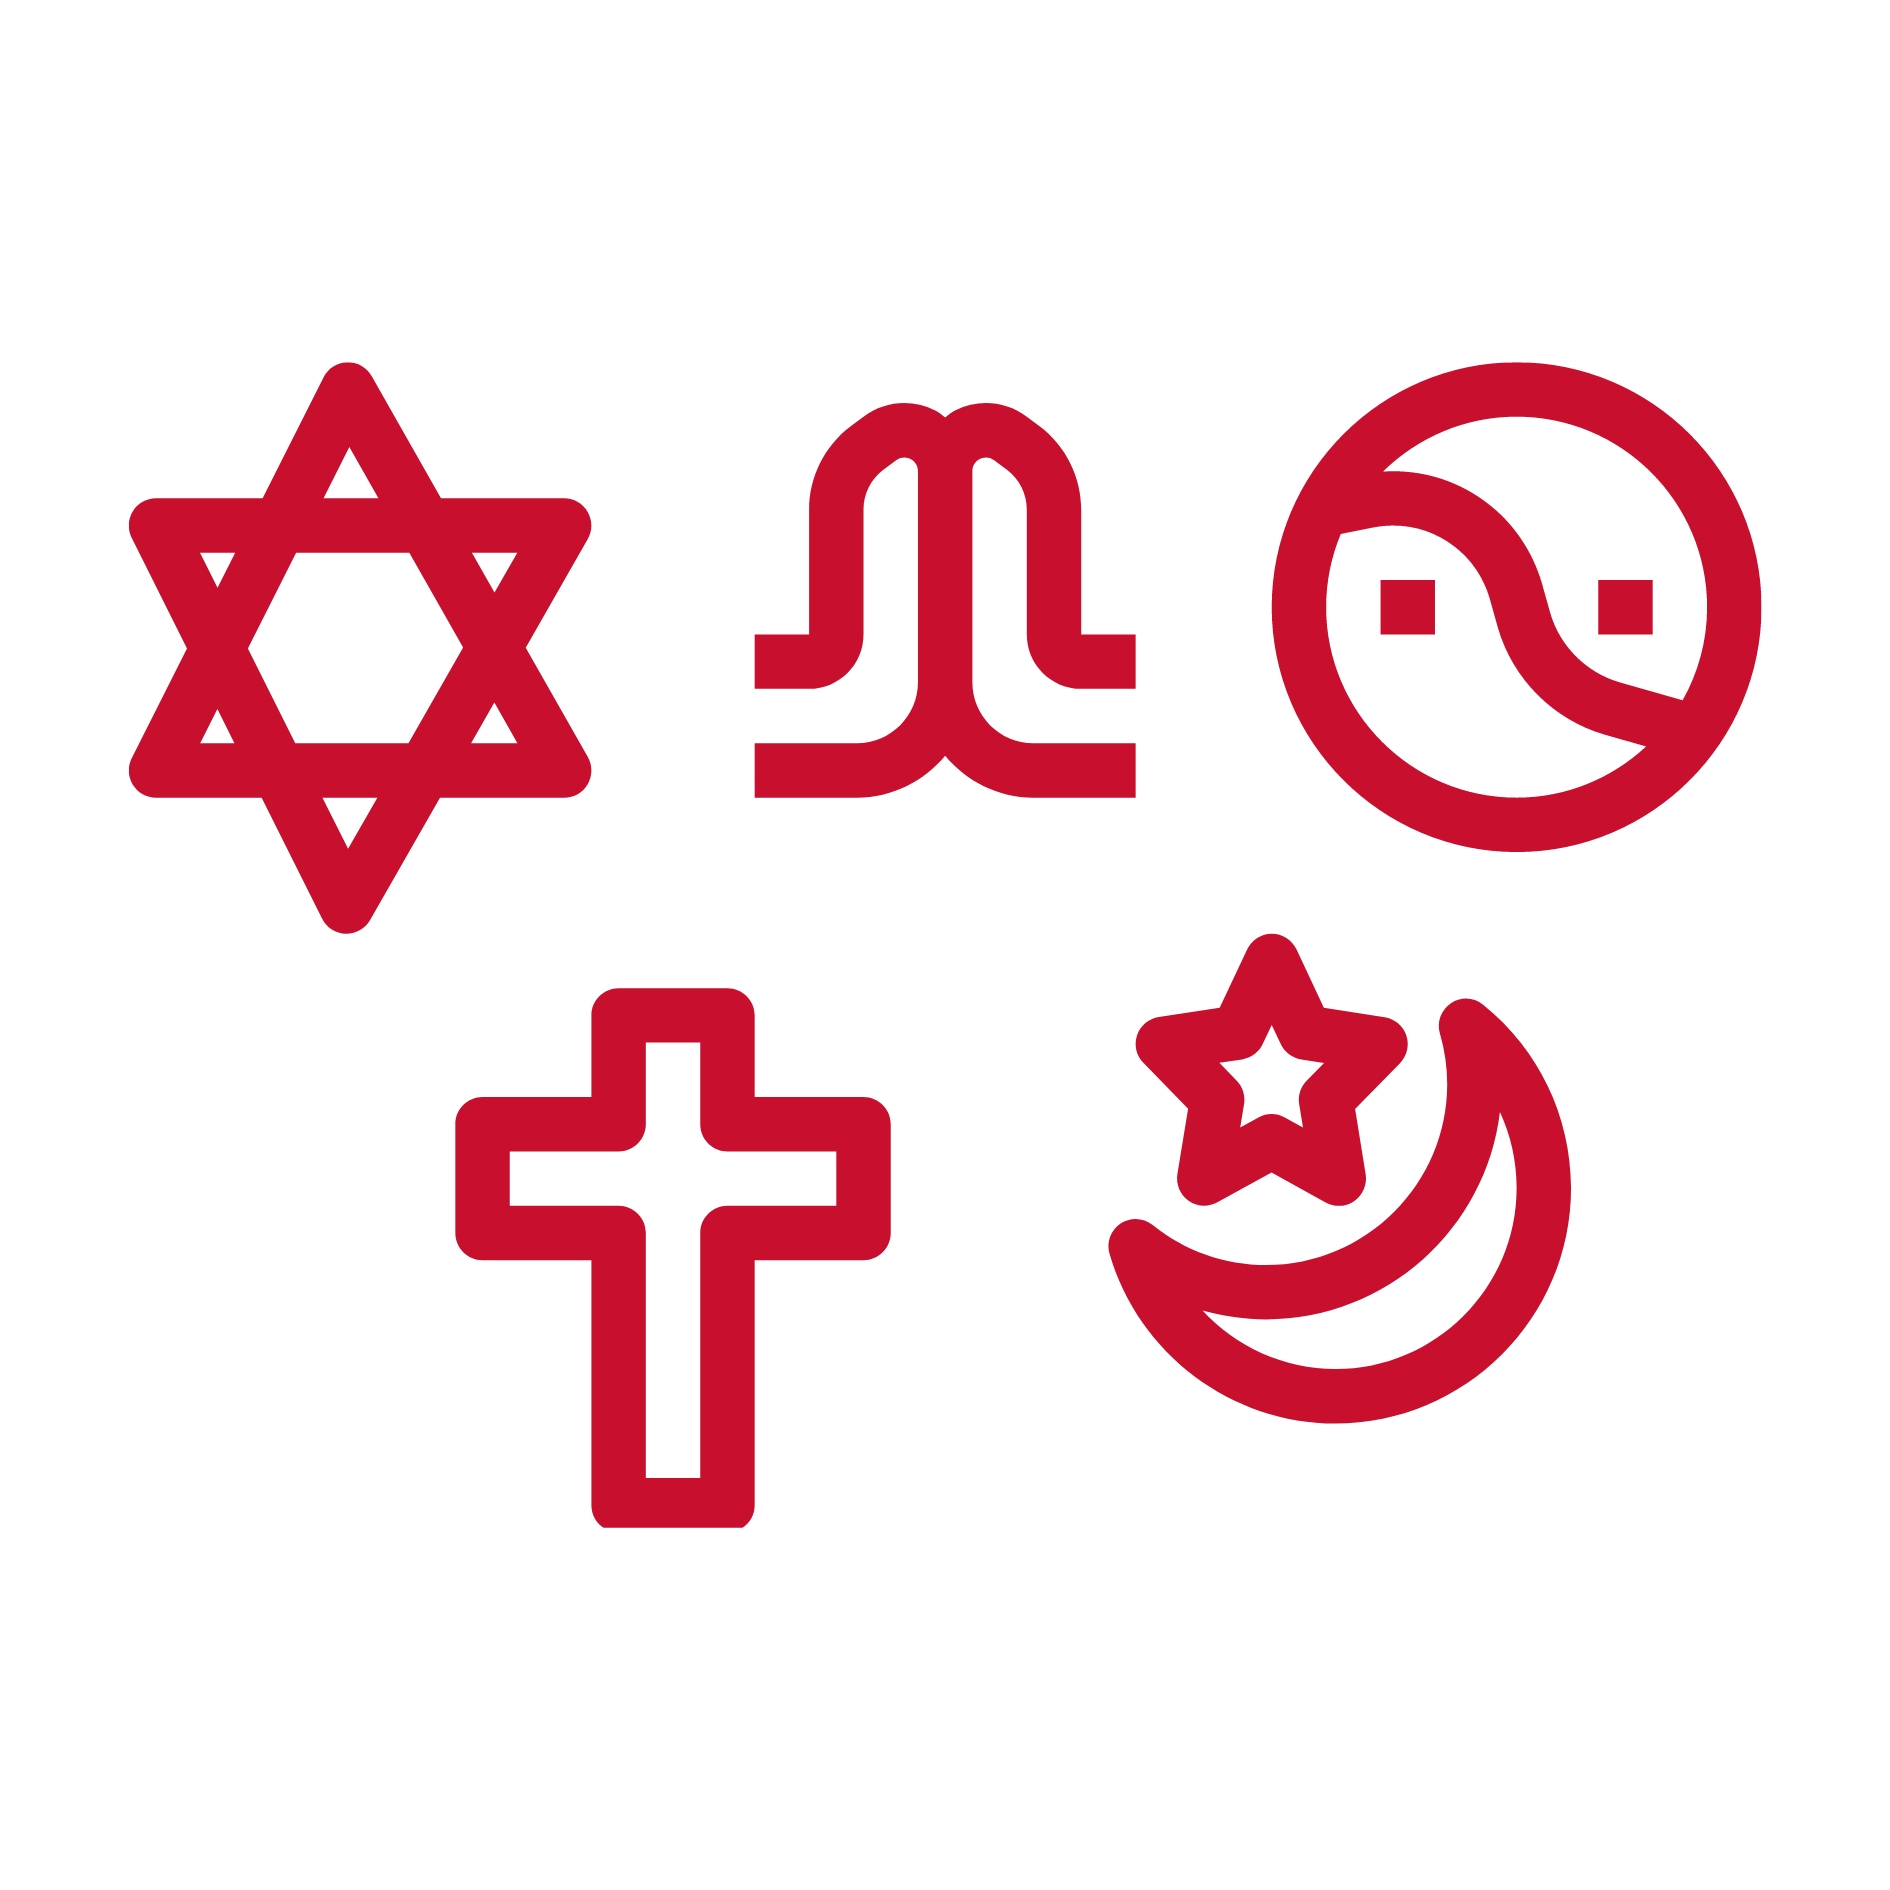 graphic of symbols of different religions (cross, yin and yang, Star of David, star and crescent)